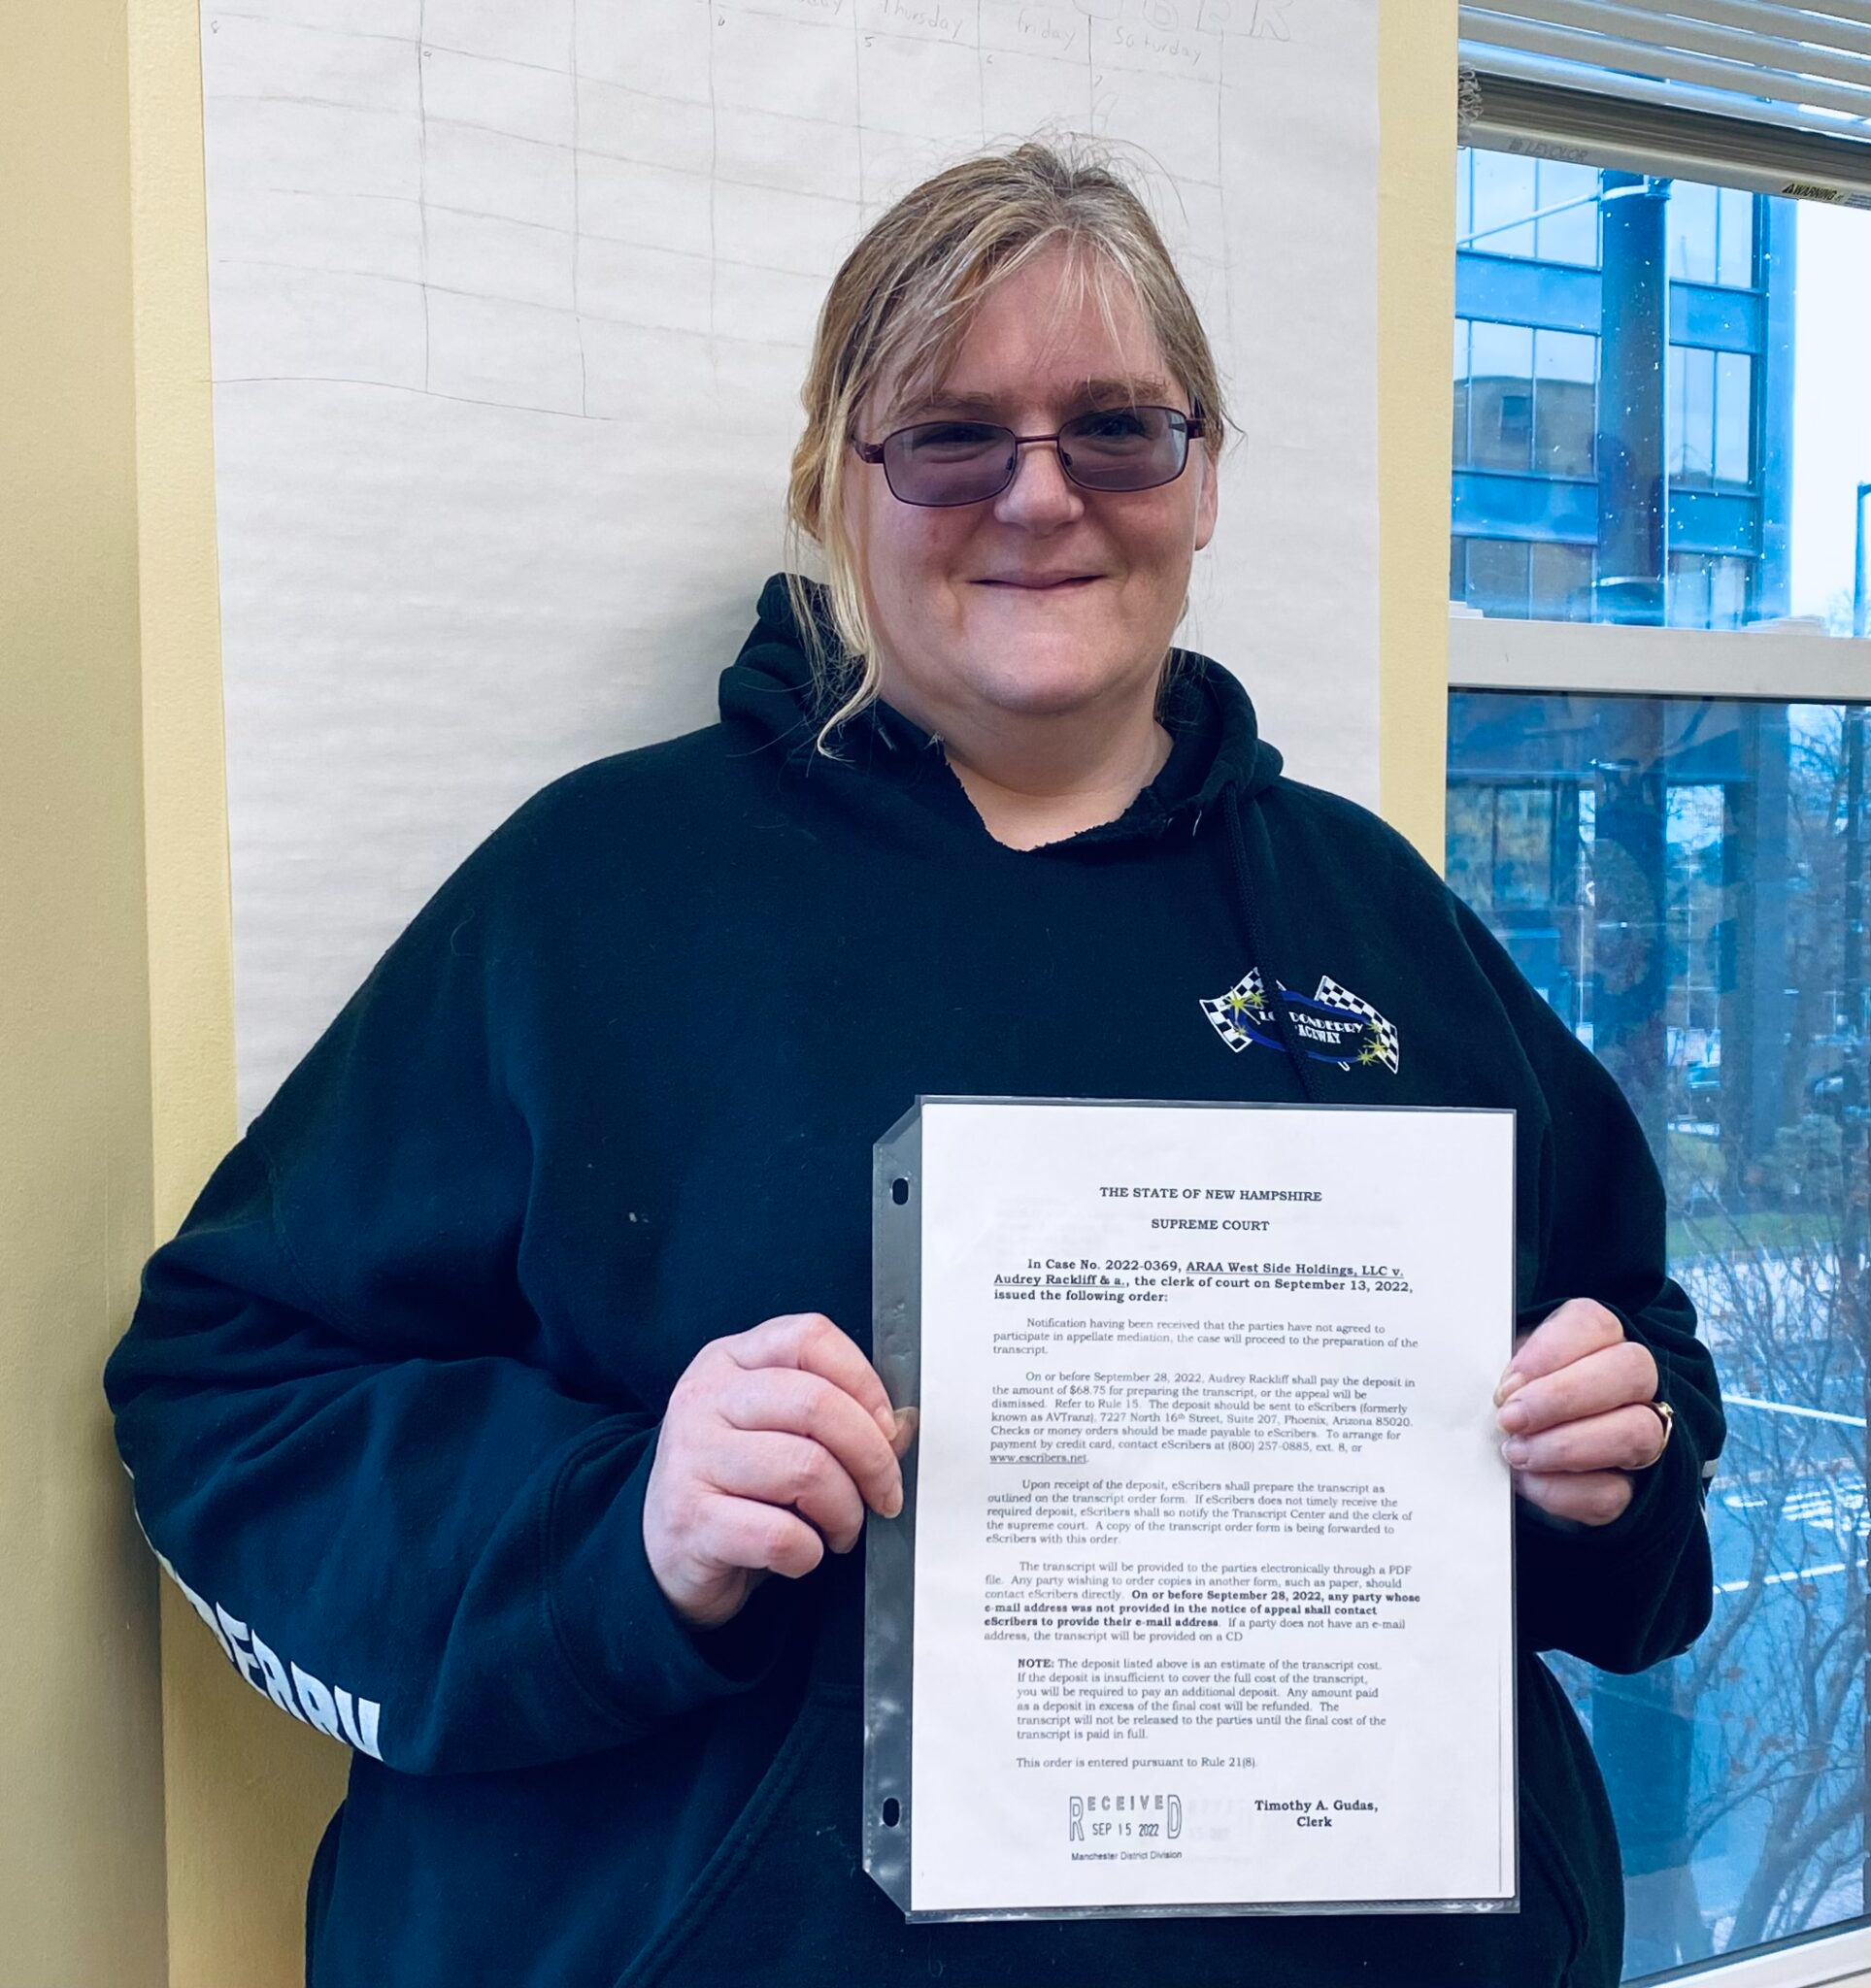   Audrey Rackliff holds a copy of the NH Supreme Court ruling which vacated a lower court’s decision that would have evicted her from her home of eight years. Photo/Pat Grossmith  